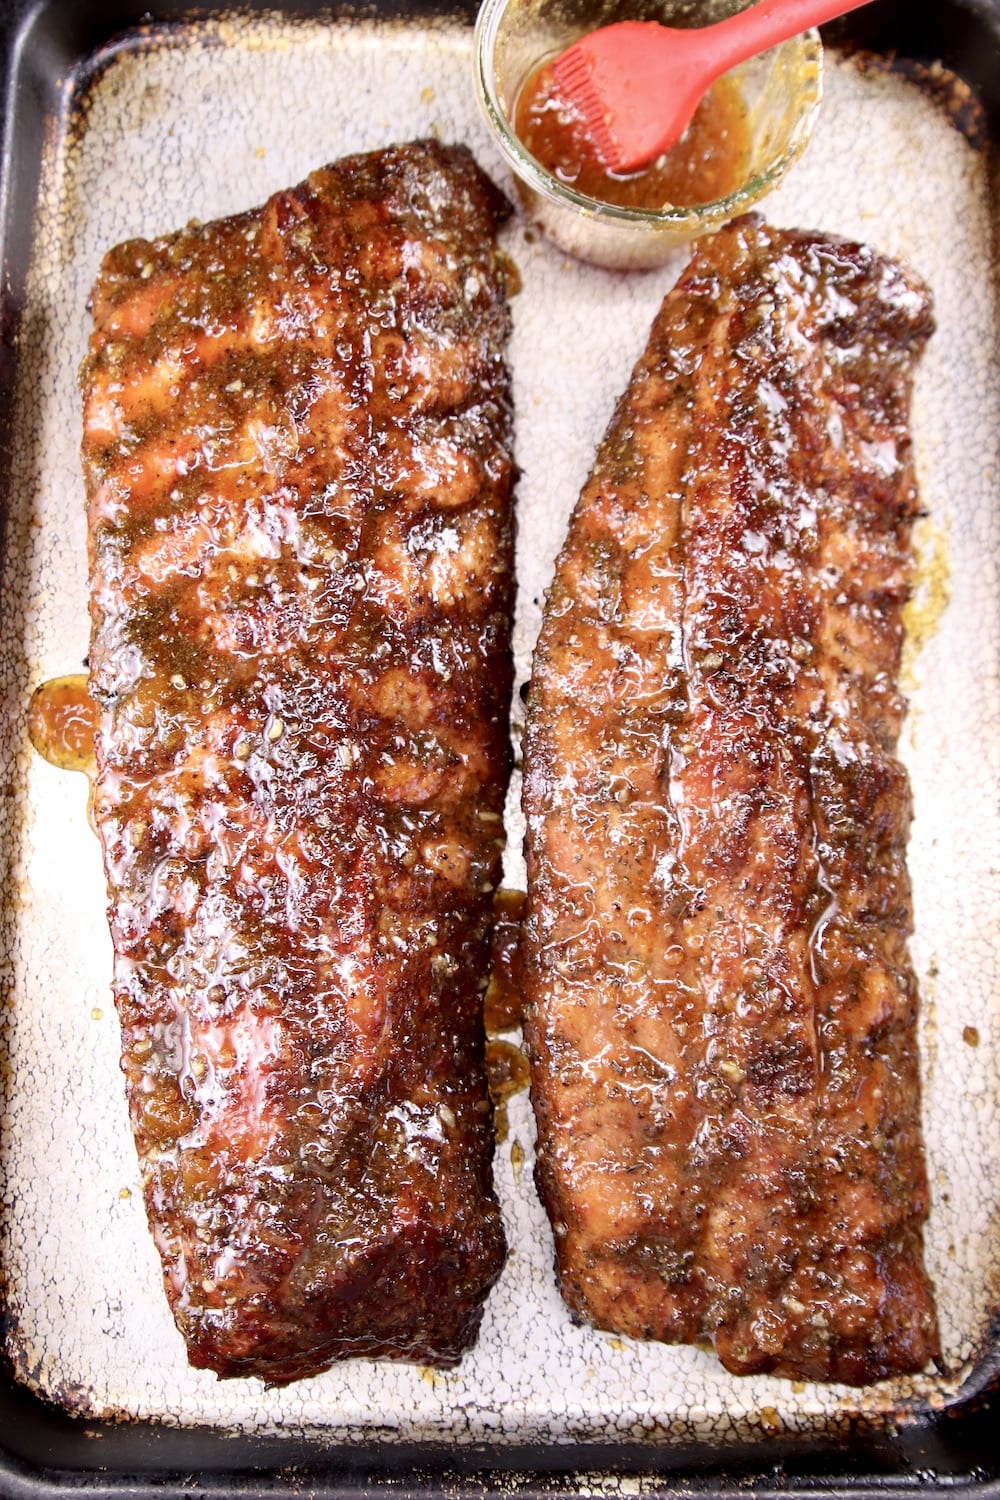 2 racks of ribs brushed with bbq sauce on a sheet pan with jar of sauce and brush